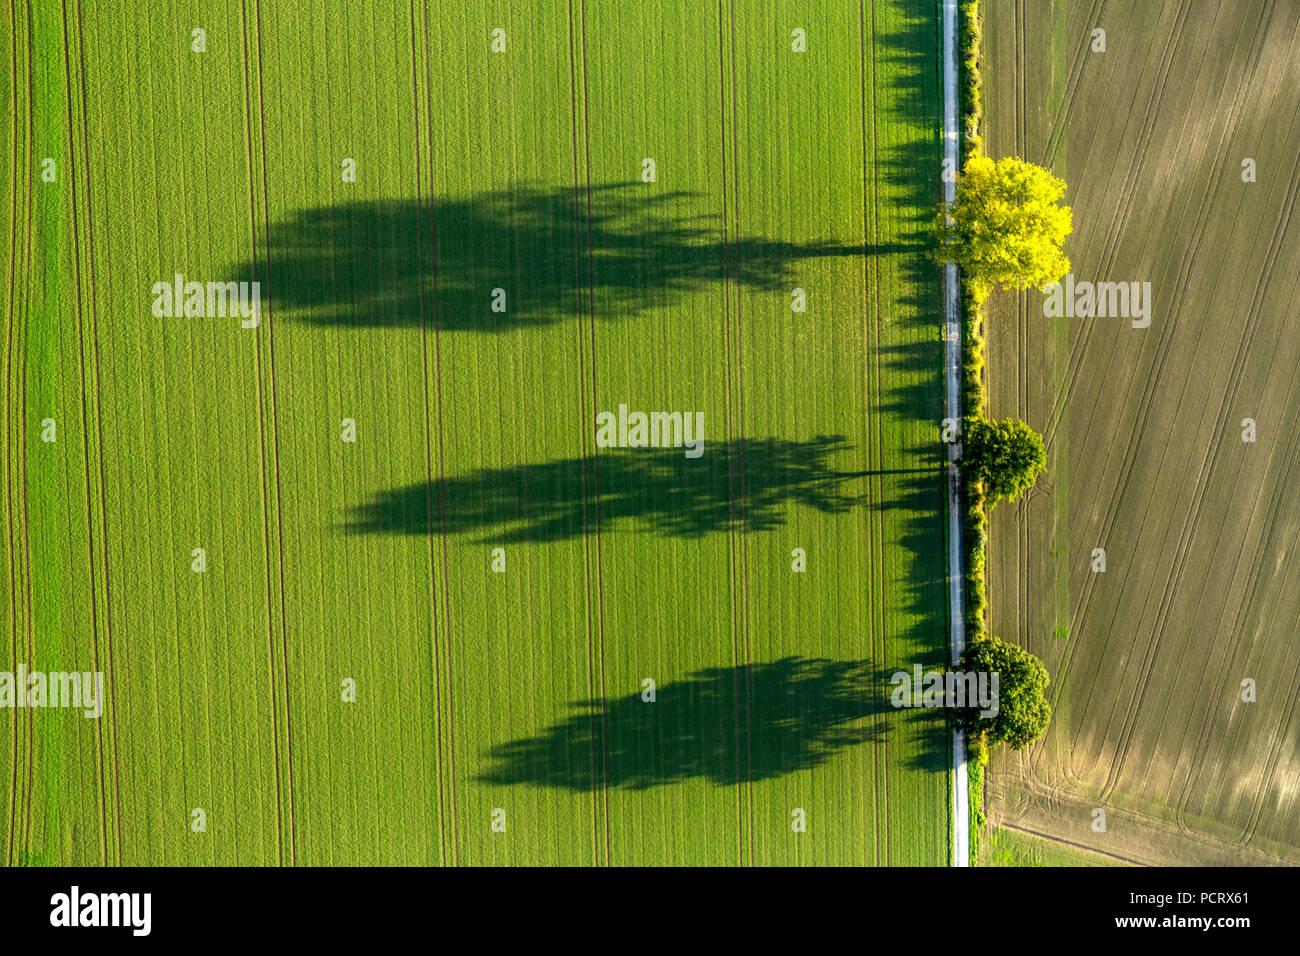 Row of trees, fields, autumn leaves, tree, trees, shadows, structures, aerial view of Werl, Soester Börde Stock Photo